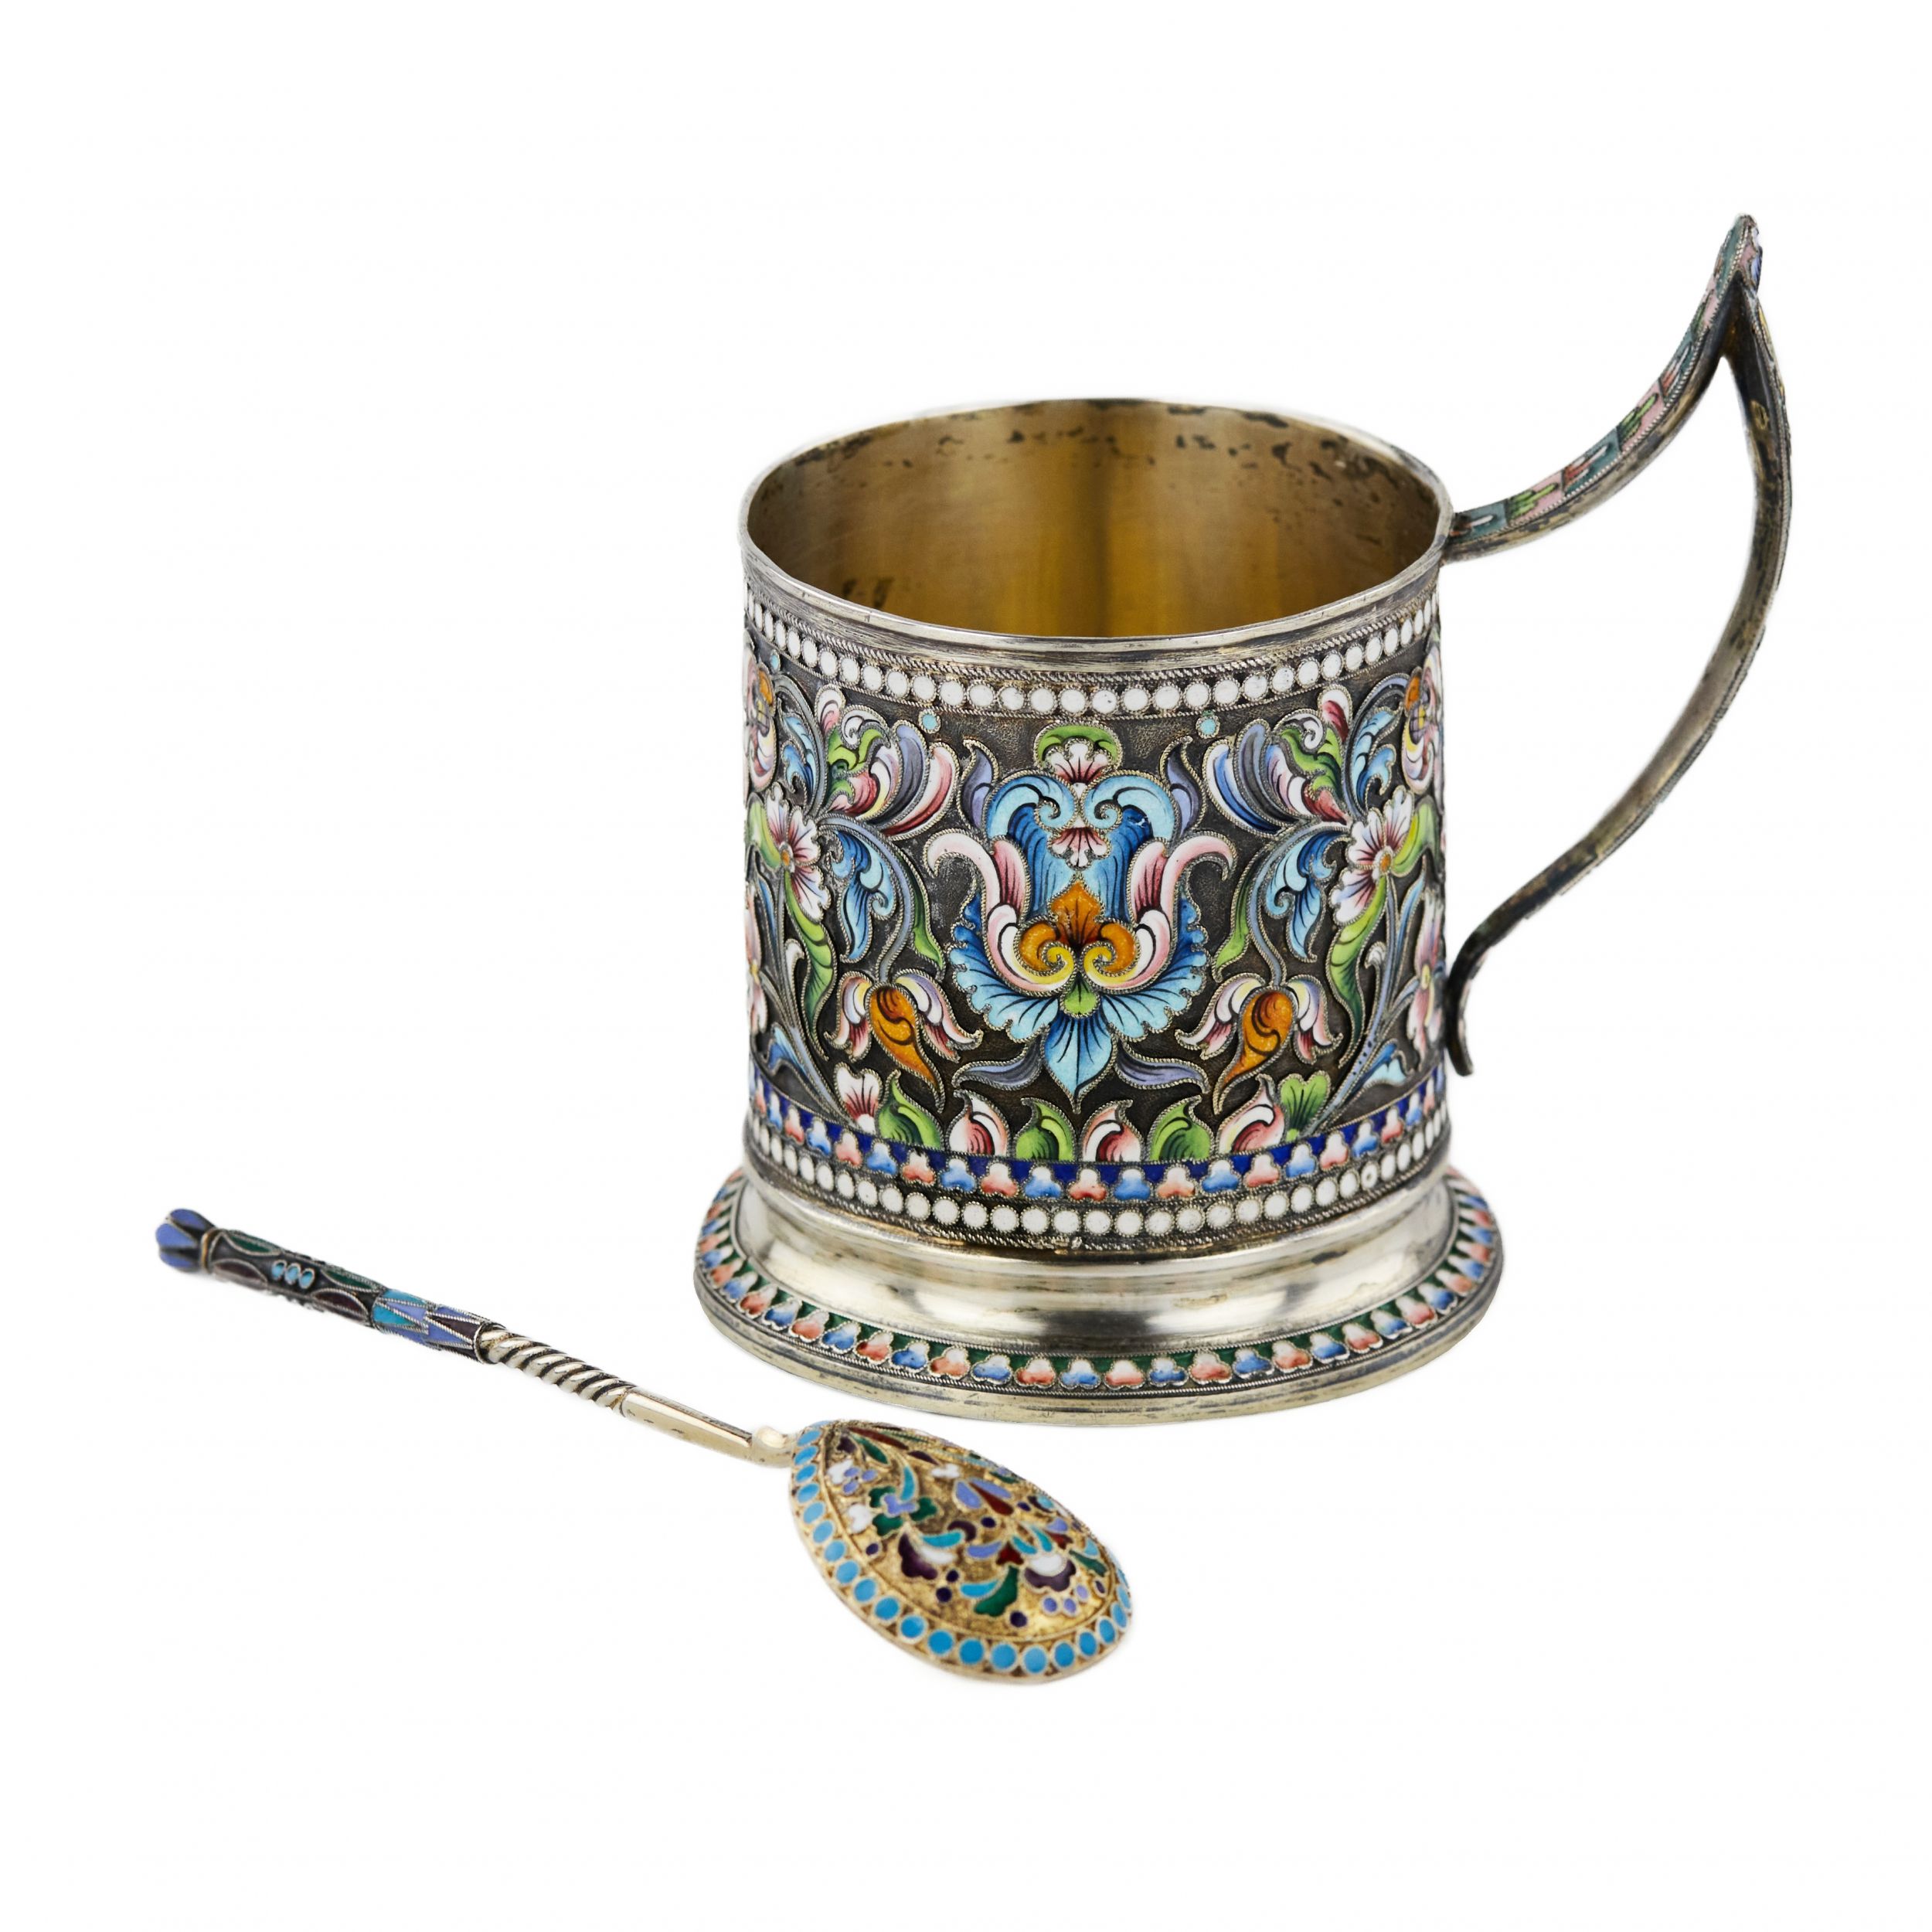 Silver-glass-holder-with-a-spoon-decorated-with-cloisonne-enamel-Moscow-1908-1917